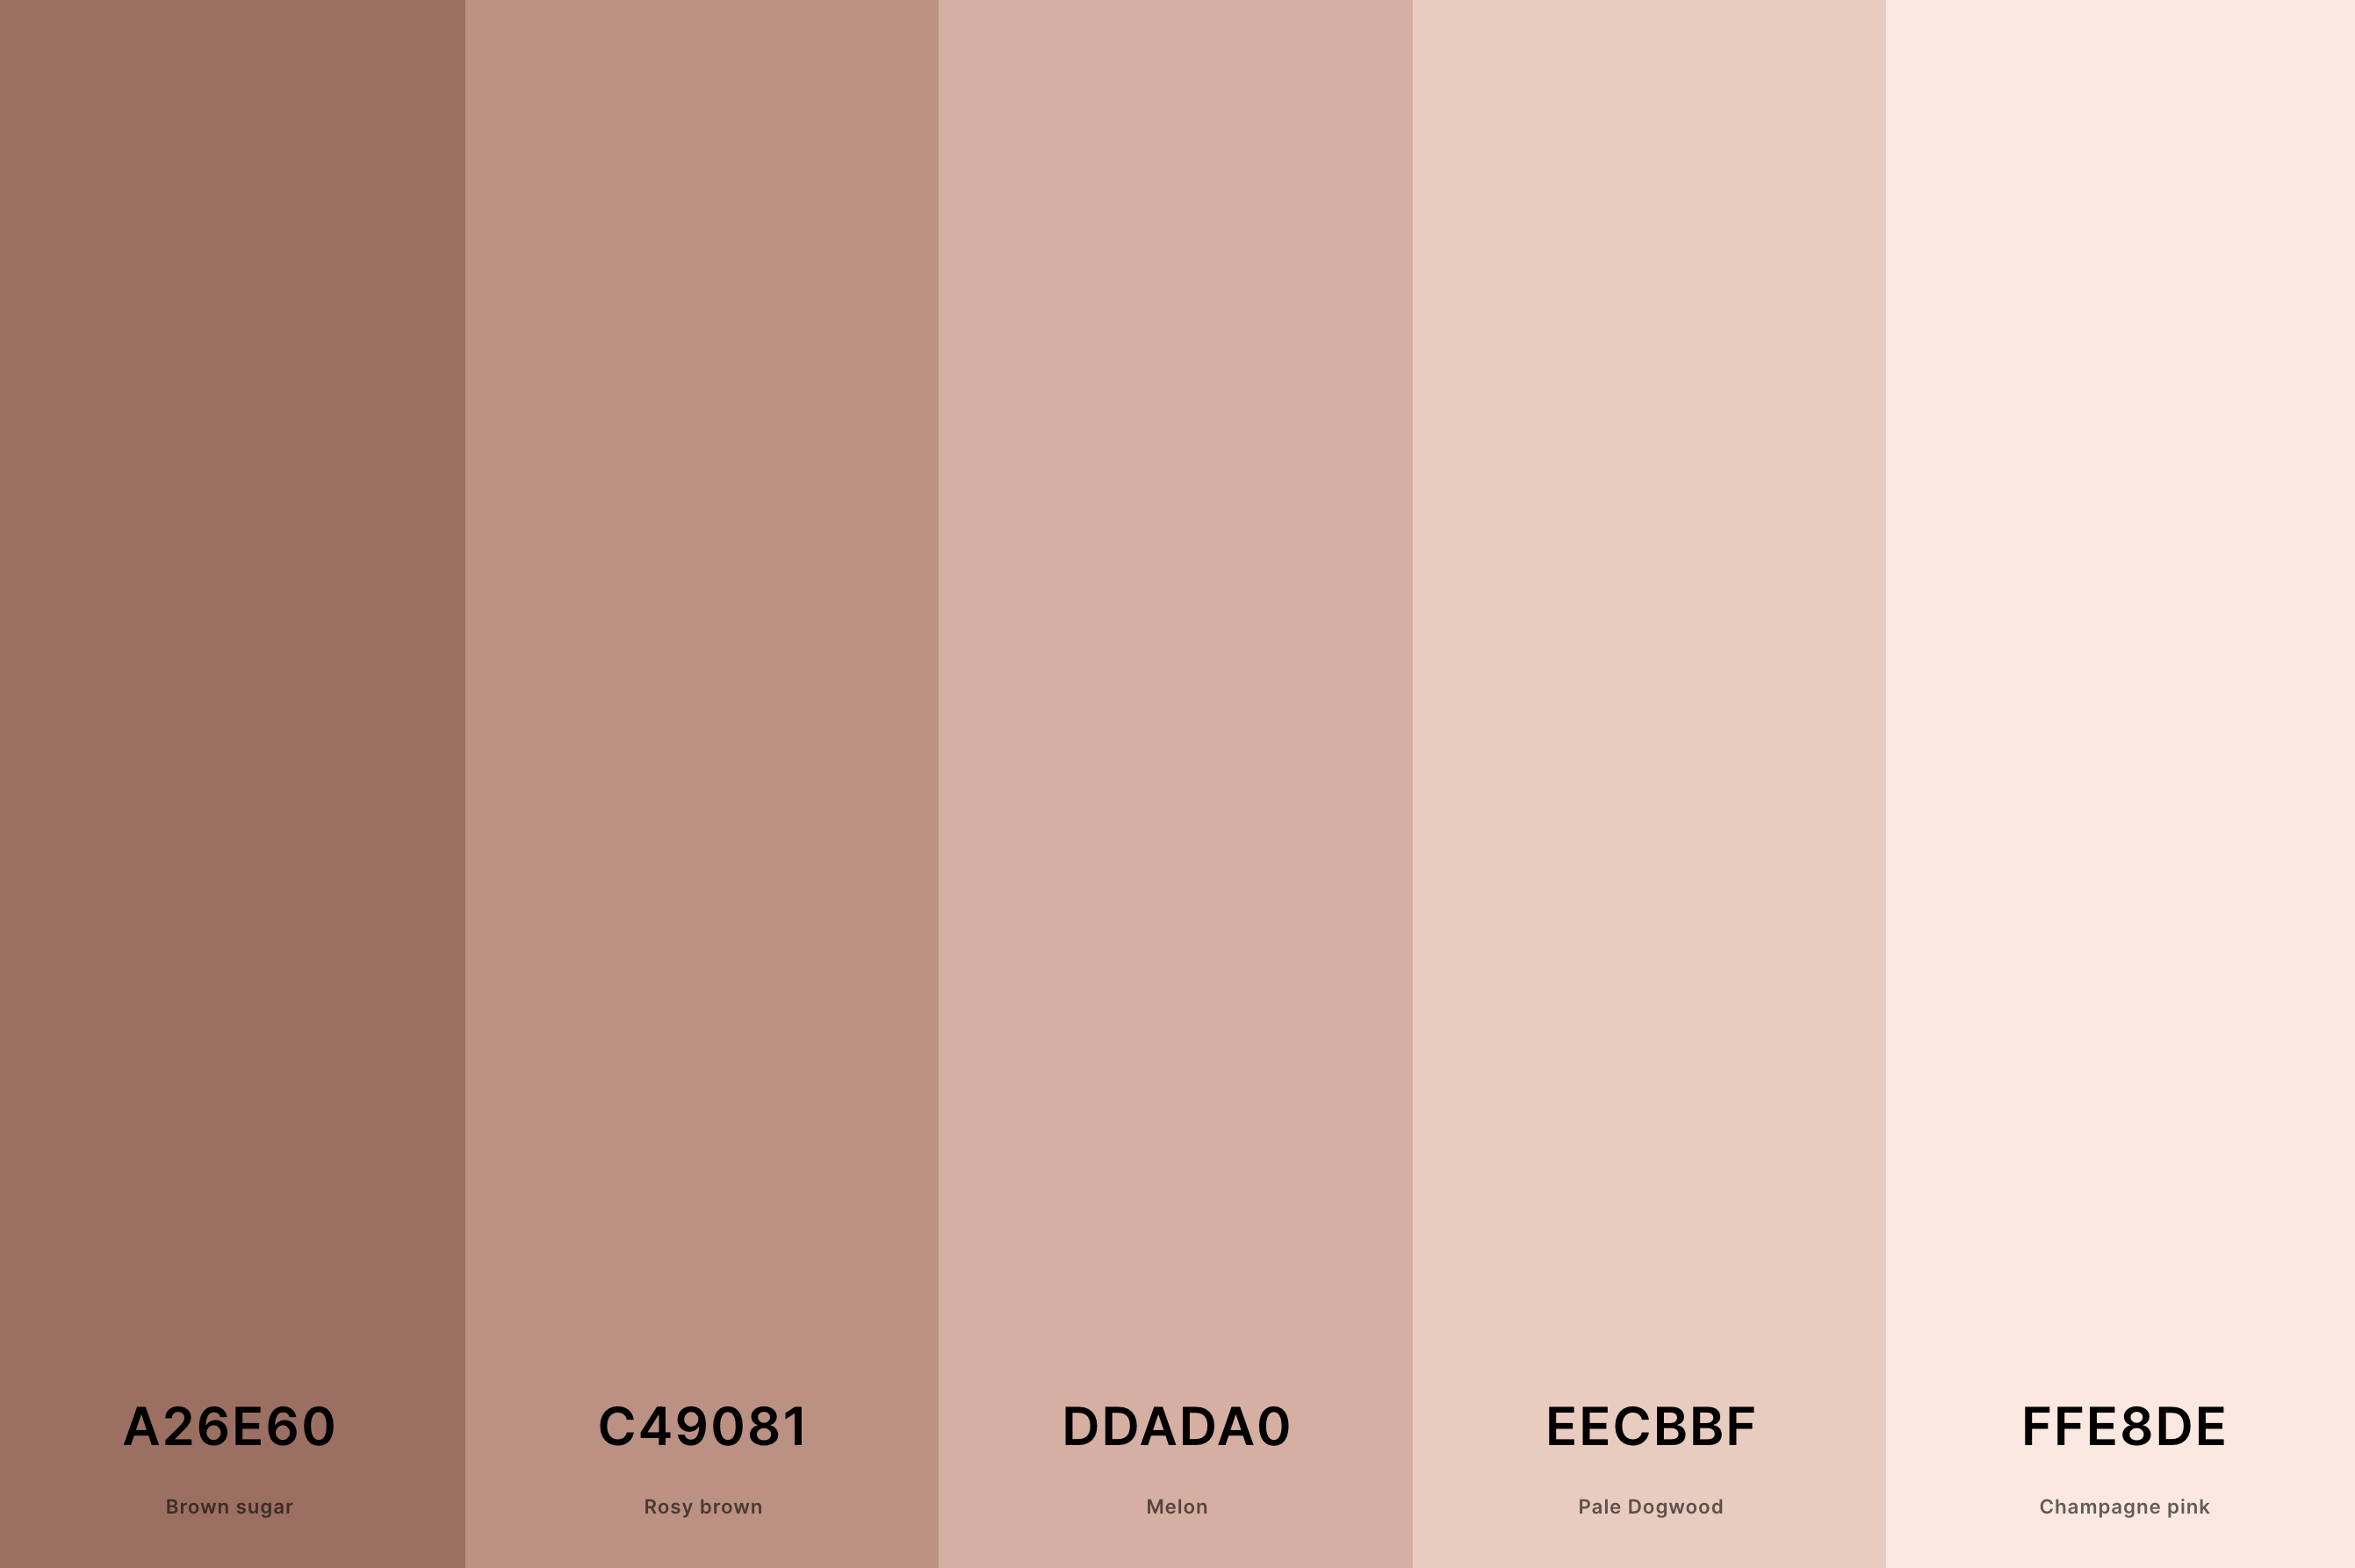 2. Rose Gold Color Palette Color Palette with Brown Sugar (Hex #A26E60) + Rosy Brown (Hex #C49081) + Melon (Hex #DDADA0) + Pale Dogwood (Hex #EECBBF) + Champagne Pink (Hex #FFE8DE) Color Palette with Hex Codes